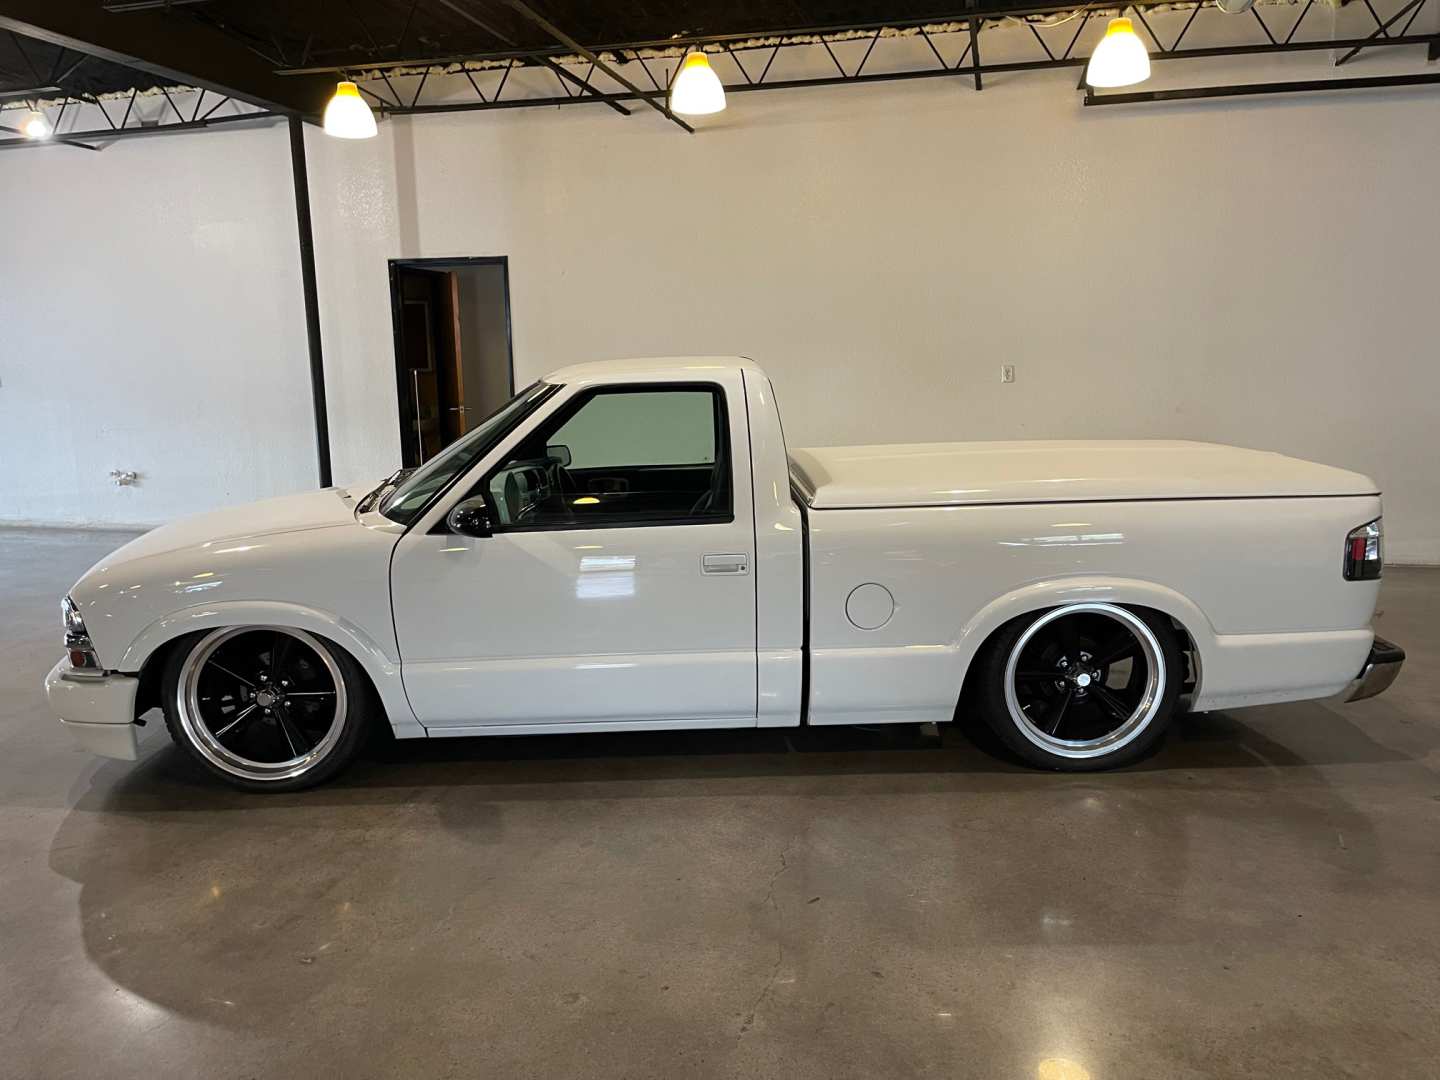 7th Image of a 2000 CHEVROLET S10